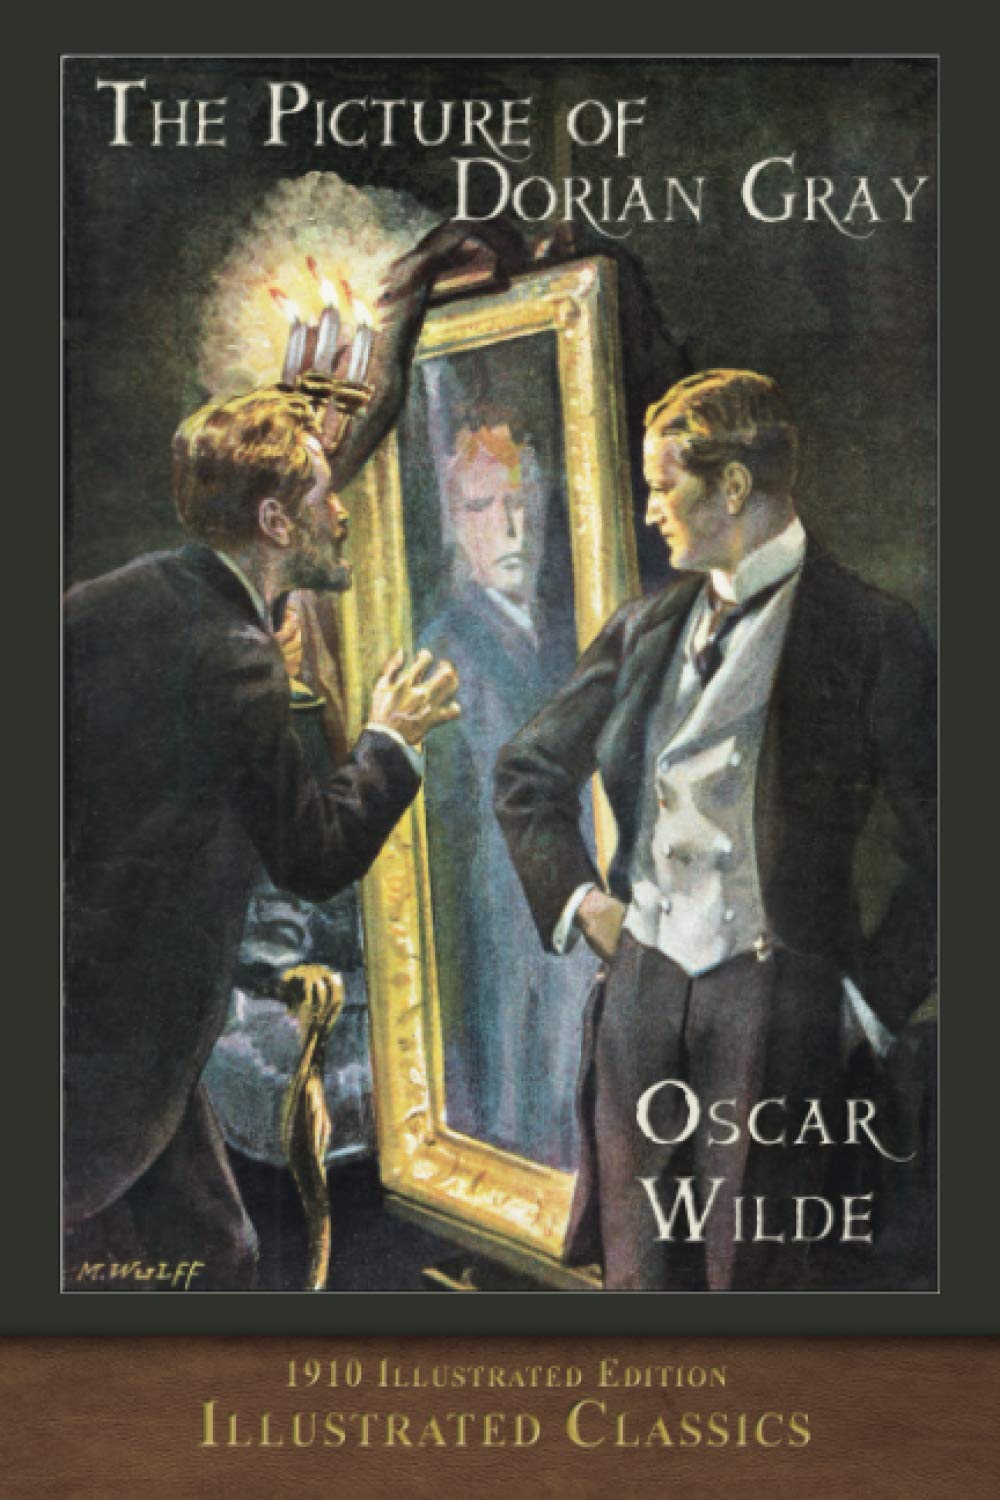 A book cover of 'The Picture of Dorian Gray'